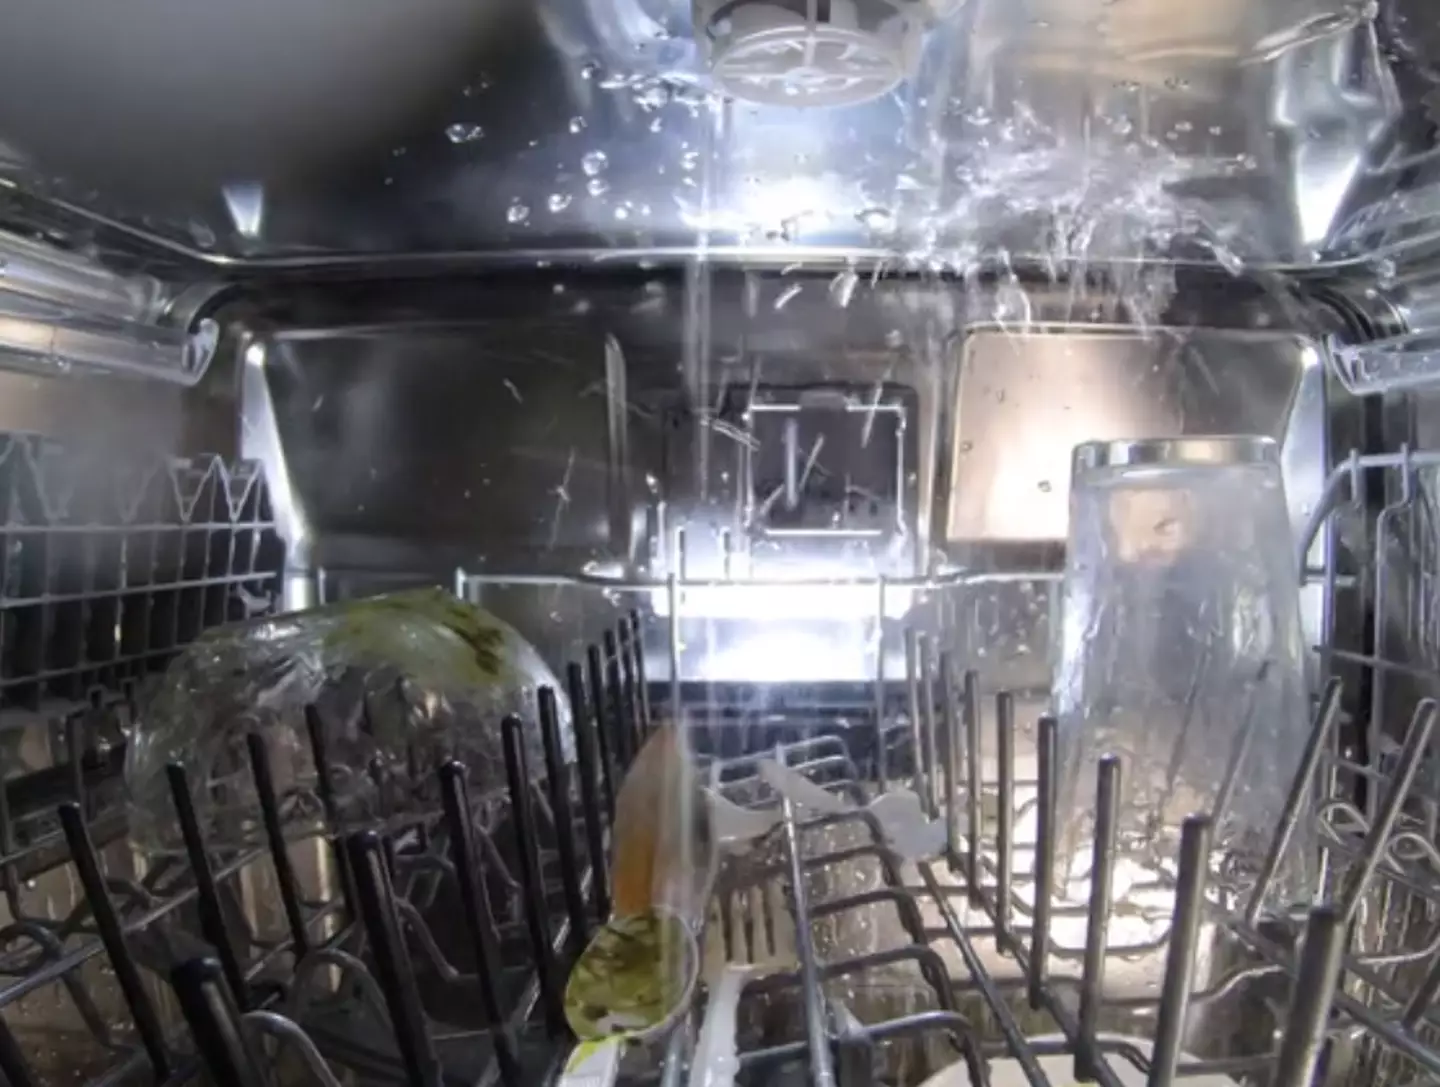 Ever wondered what the inside of a dishwasher looked like?